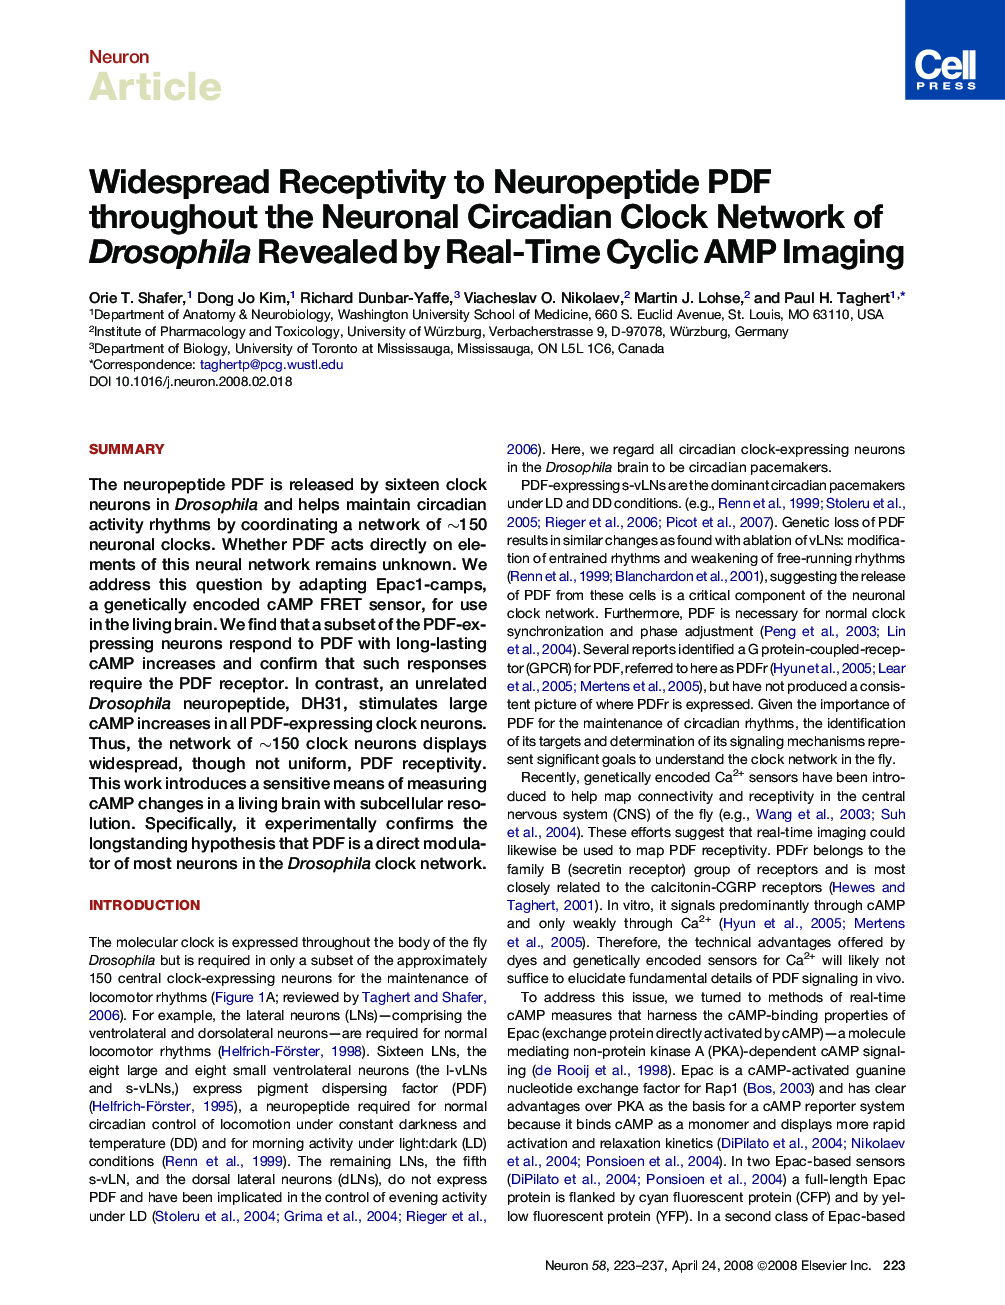 Widespread Receptivity to Neuropeptide PDF throughout the Neuronal Circadian Clock Network of Drosophila Revealed by Real-Time Cyclic AMP Imaging